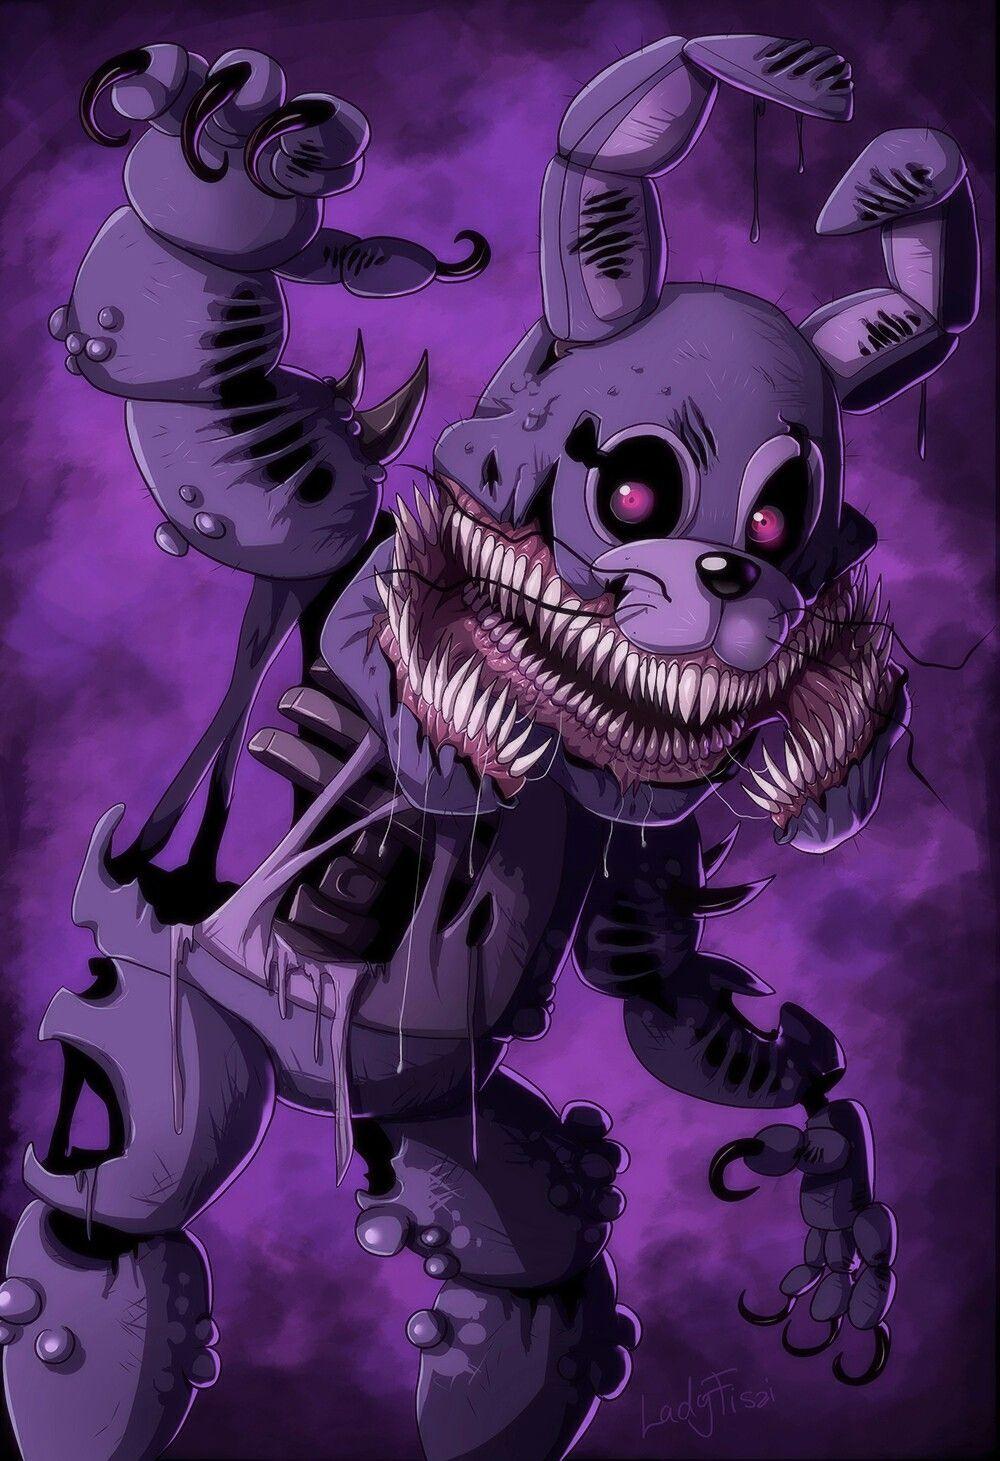 New FNAF Novel The Twisted Ones- Twisted Bonnie #Nightmare Fuel